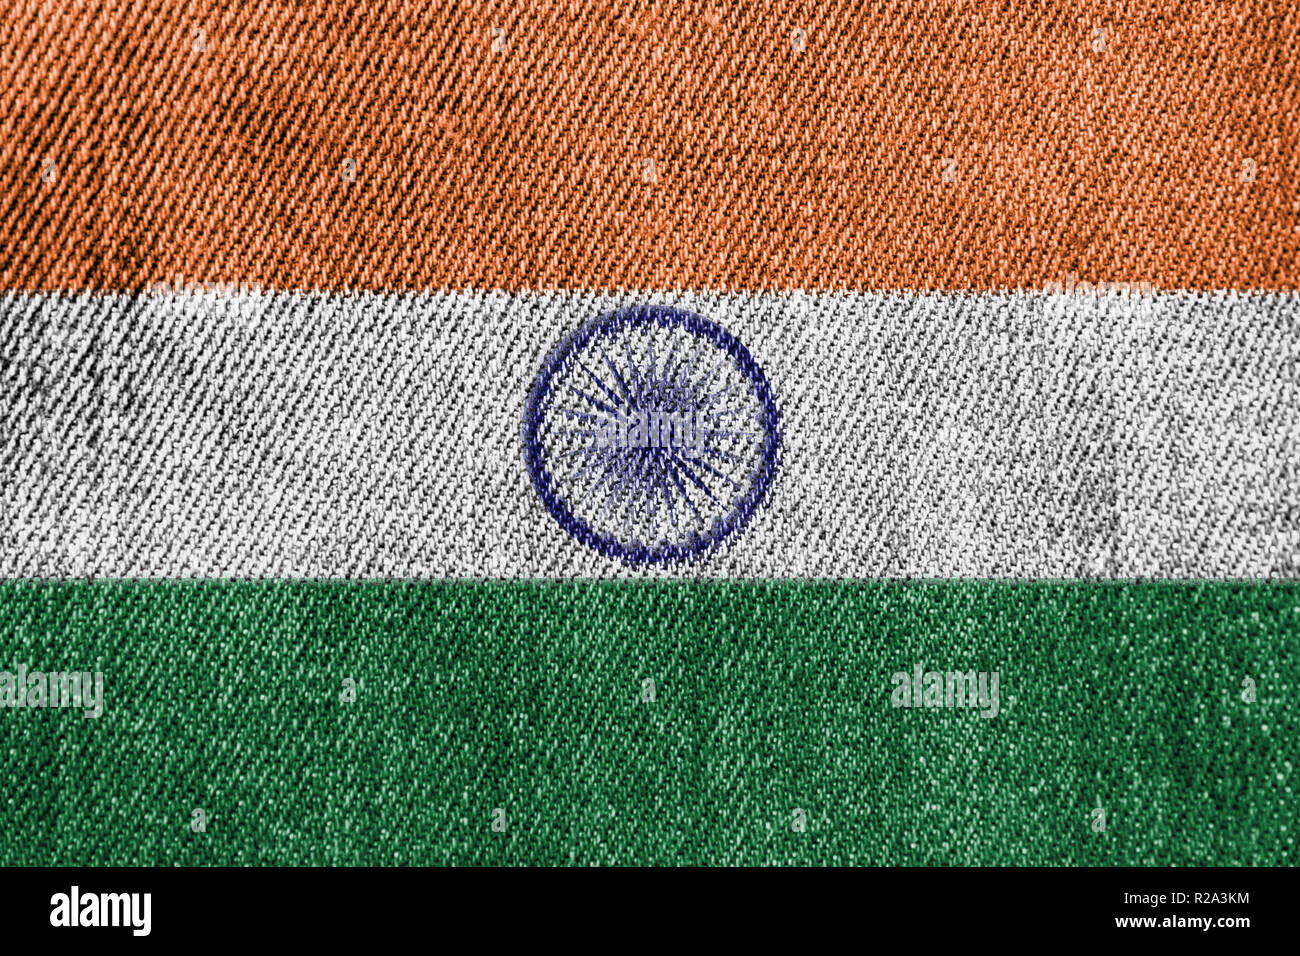 India Textile Industry Or Politics Concept: Indian Flag Denim Jeans  Background Texture Stock Photo - Alamy